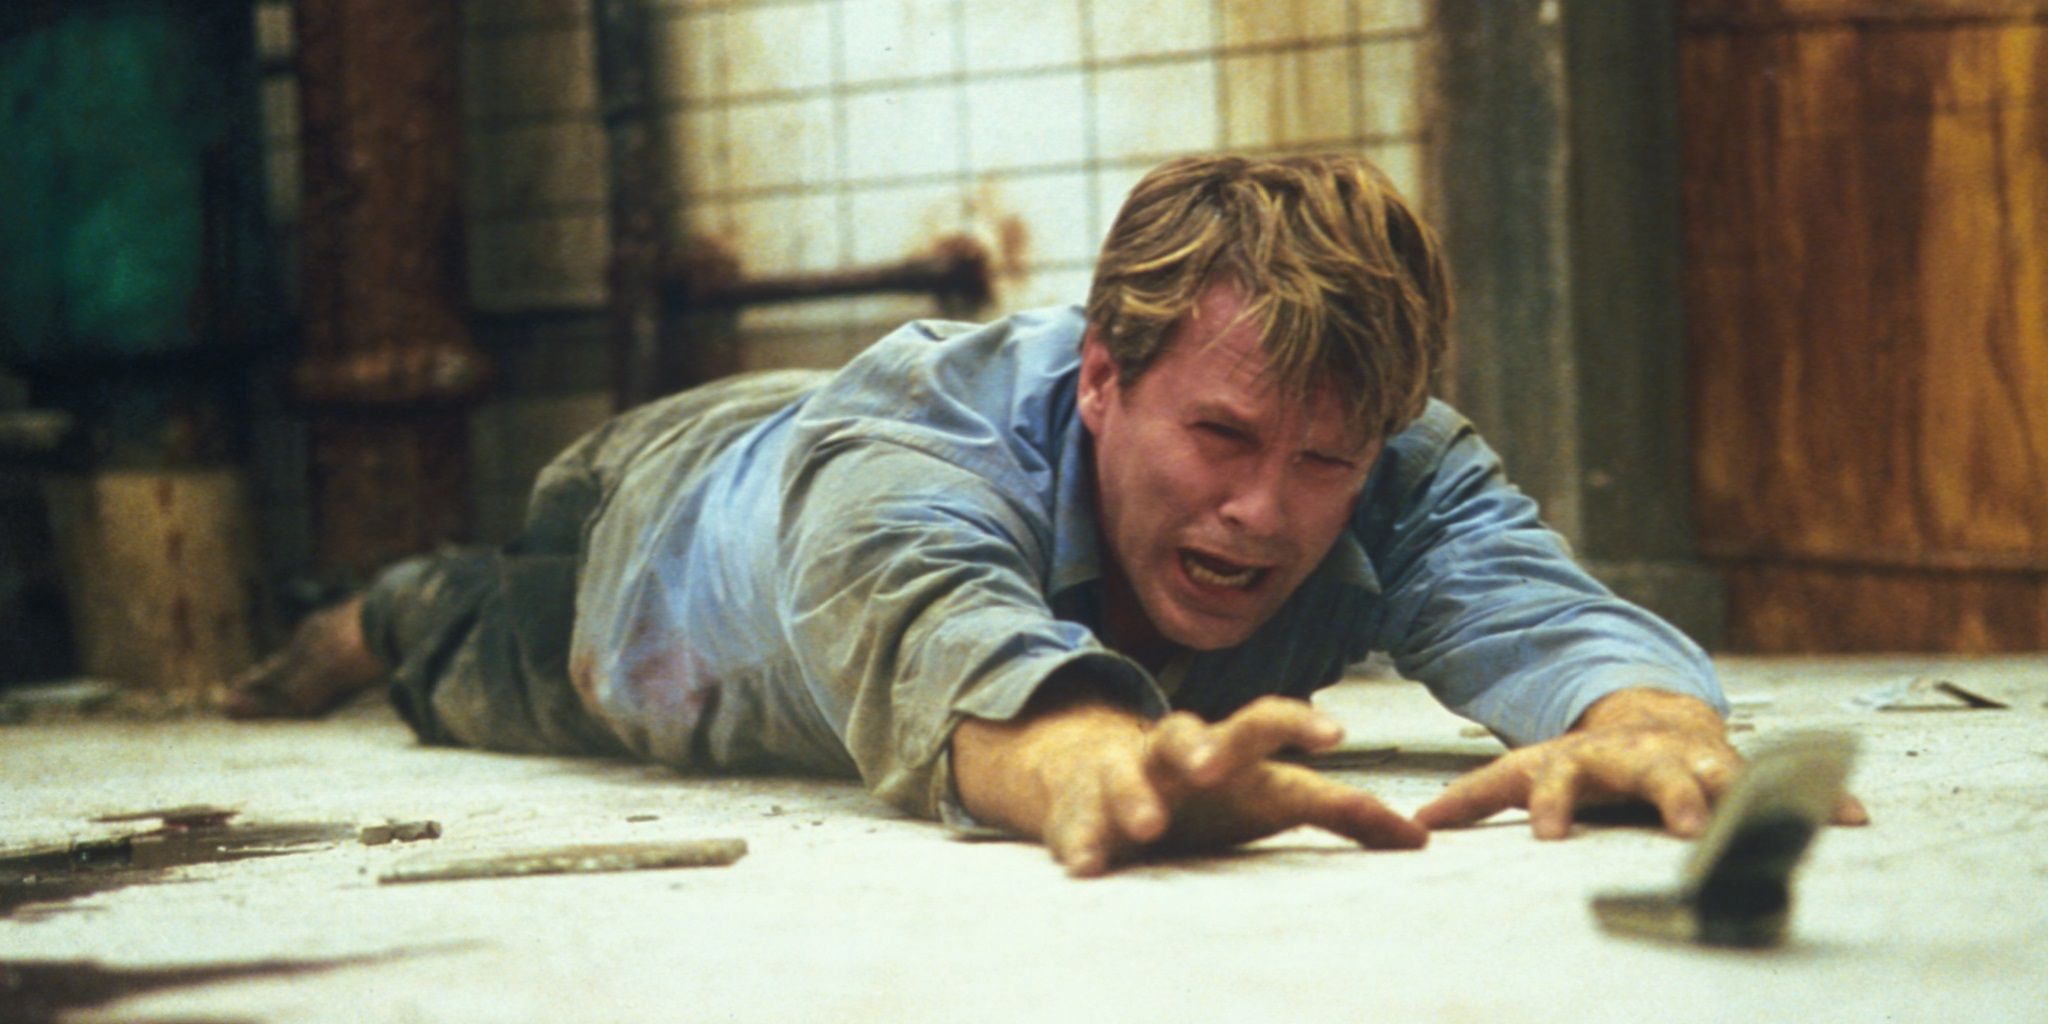 Cary Elwes arrives at Saw's phone